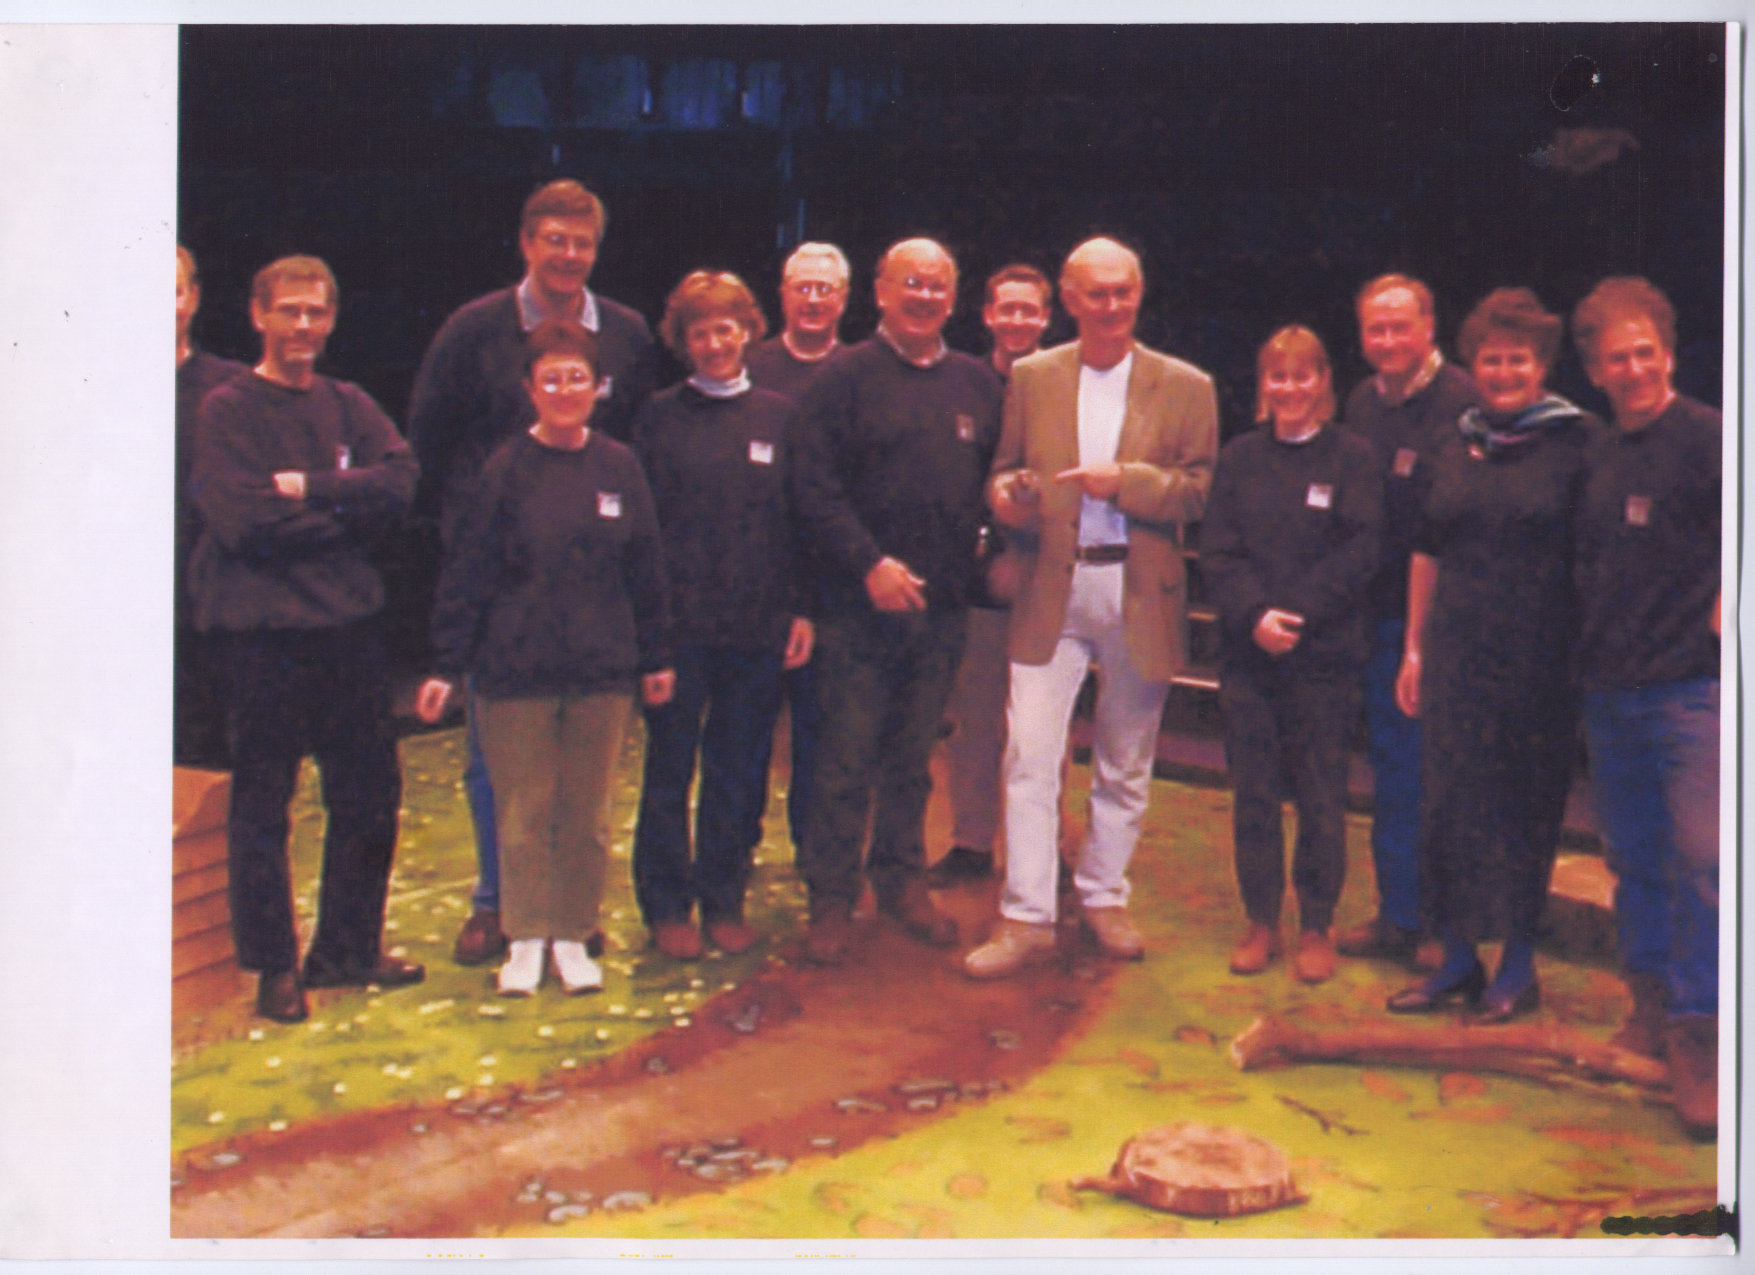 The cast and crew of Blue Remembered Hills (2001) on set with Sir Alan Ayckbourn